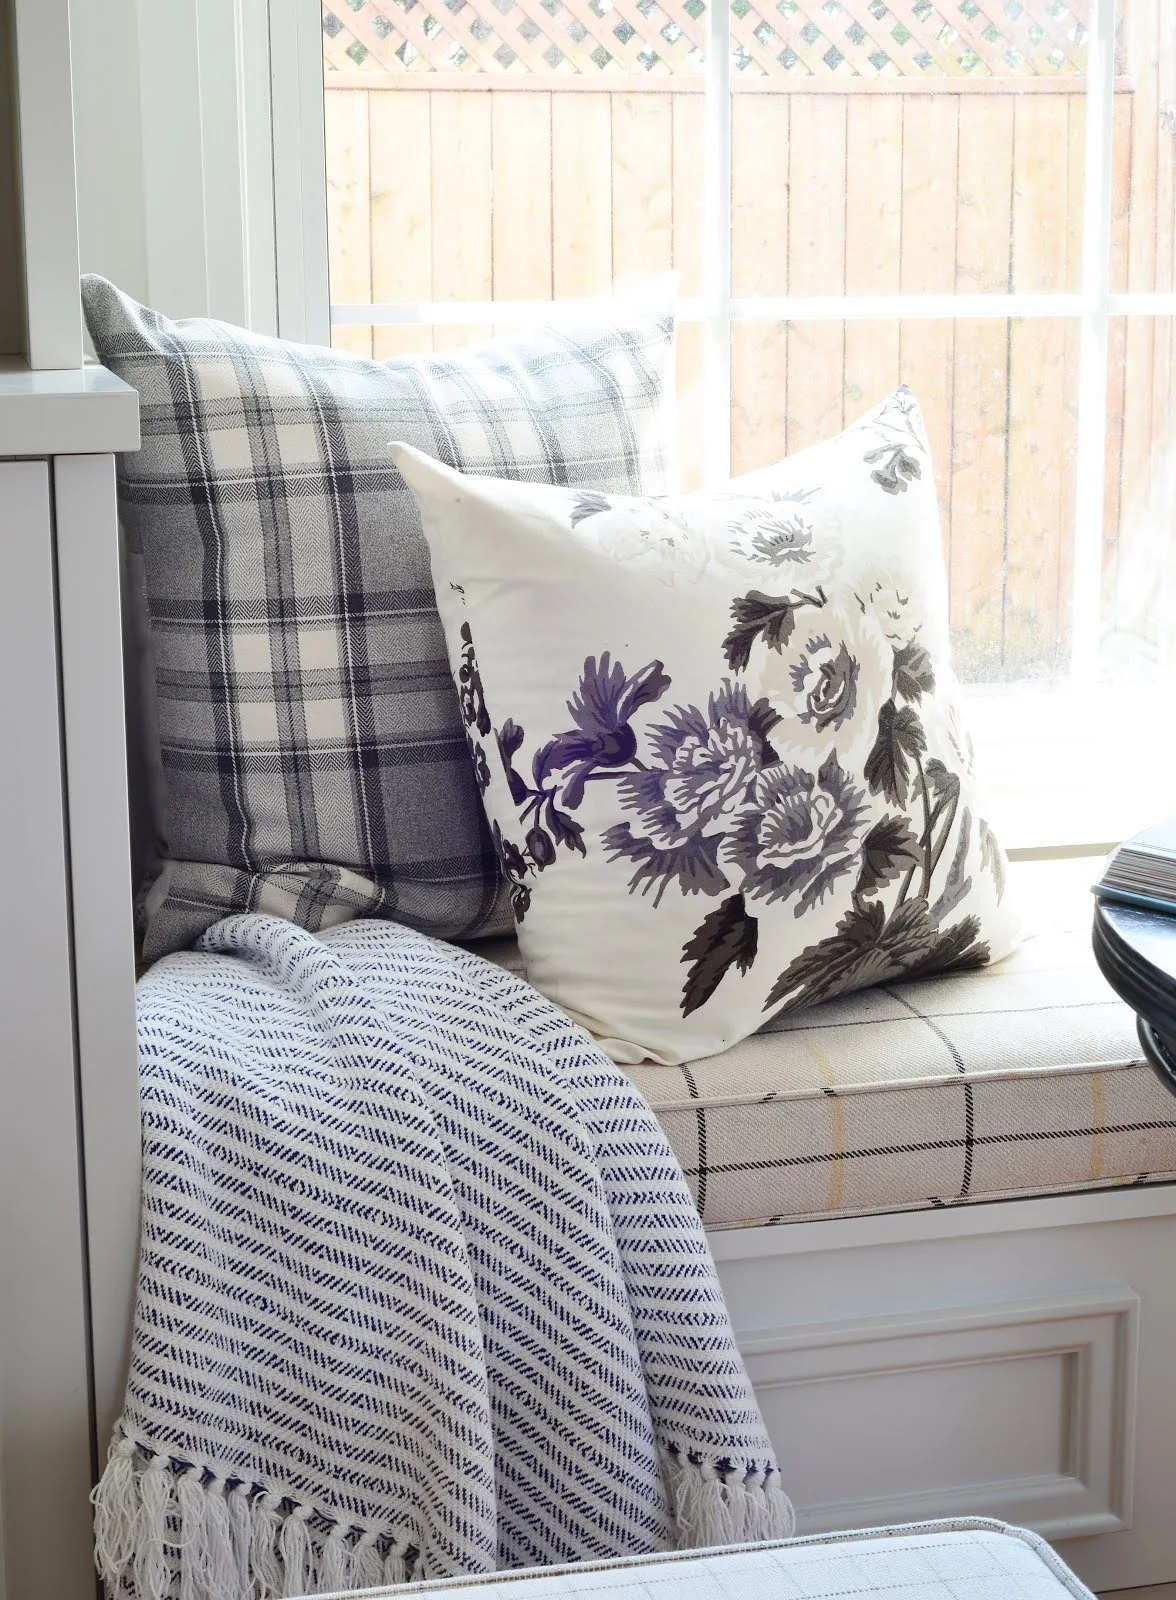 cozy window bench seat, floral pillow cover, striped throw, plaid cushion covers